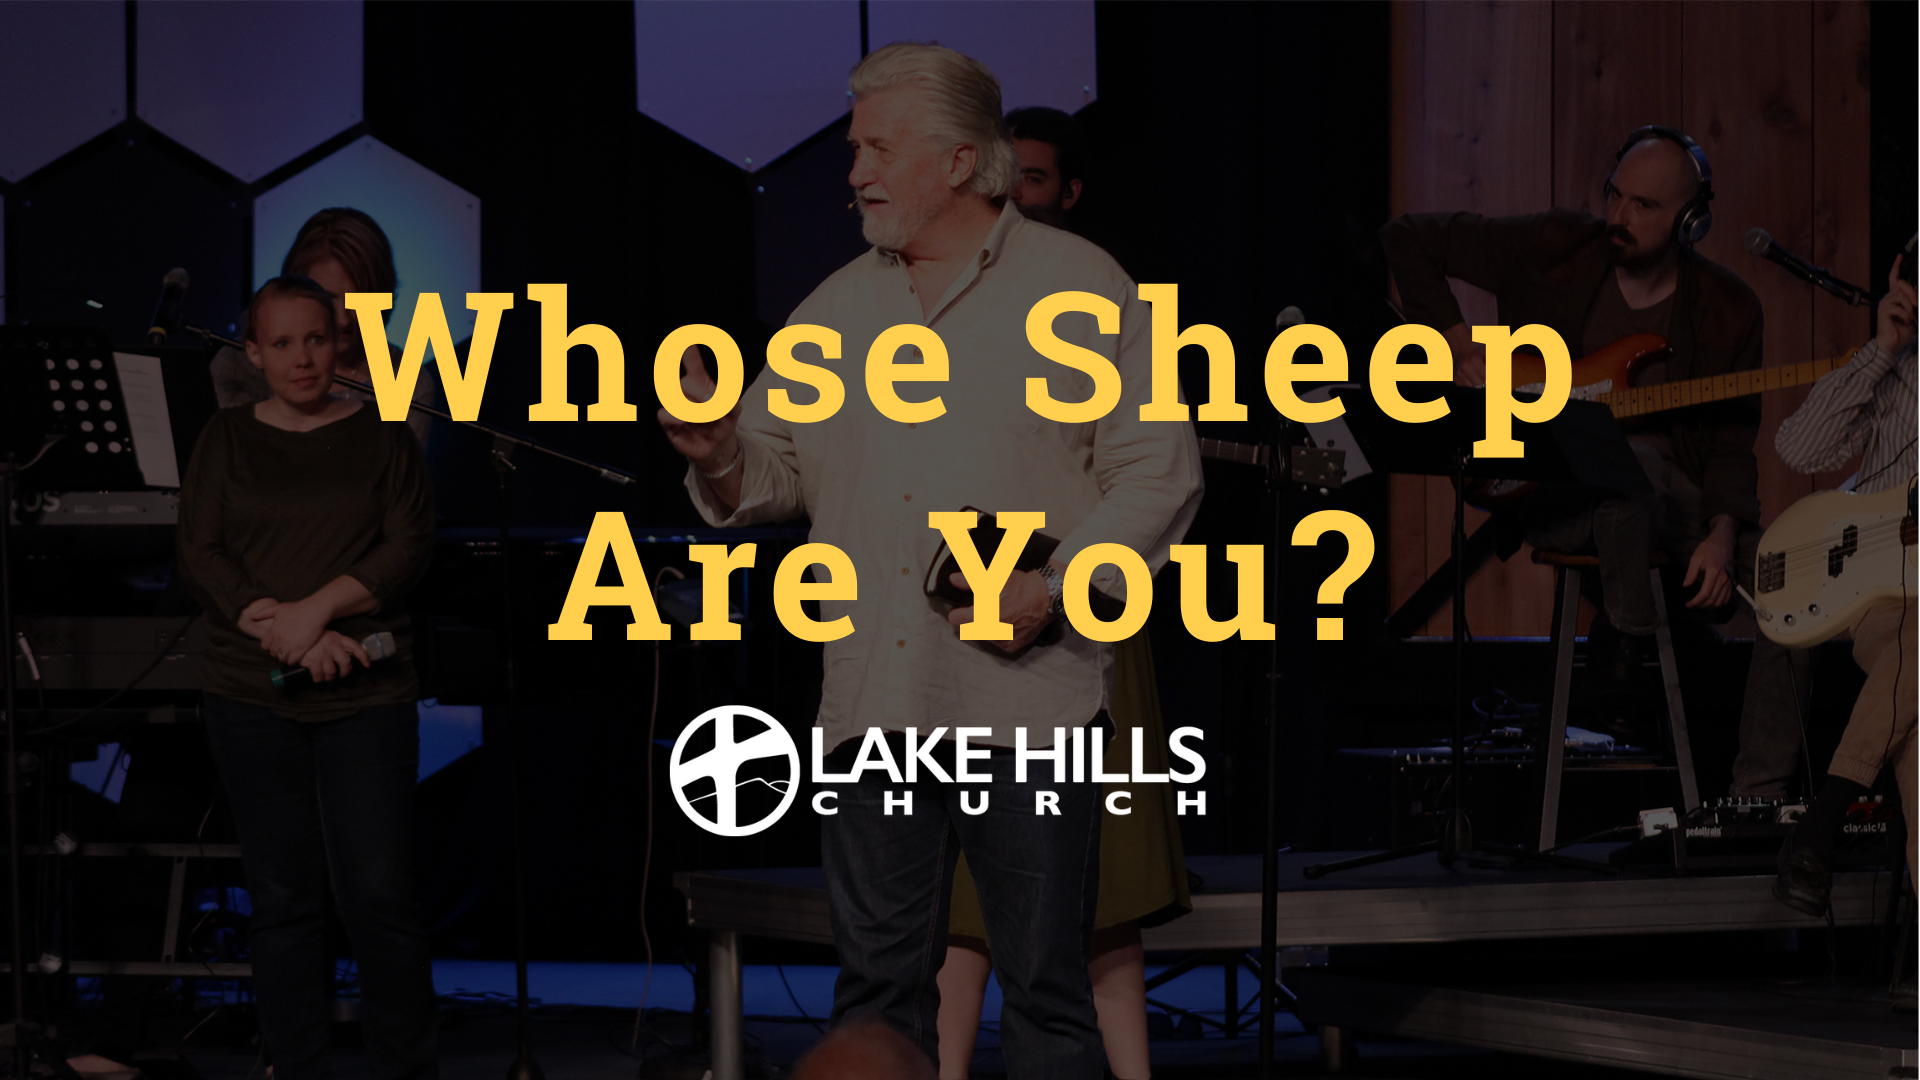 Whose Sheep are you?